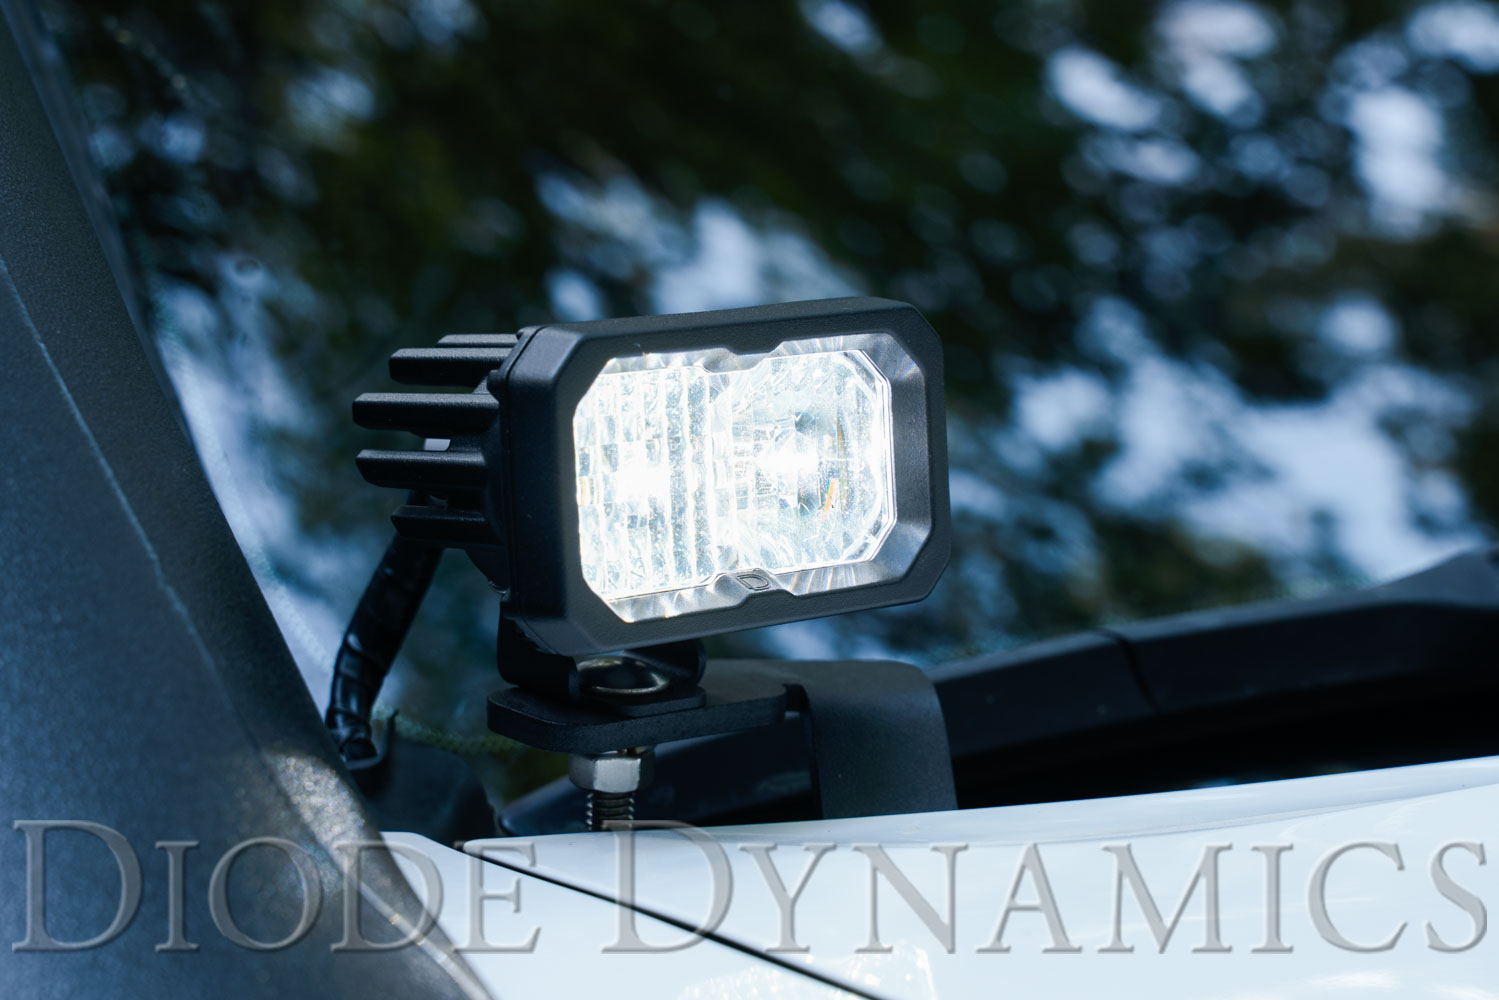 Diode Dynamics Stage Series 2 Inch LED Pod, Sport White Driving Standard ABL Pair - Click Image to Close